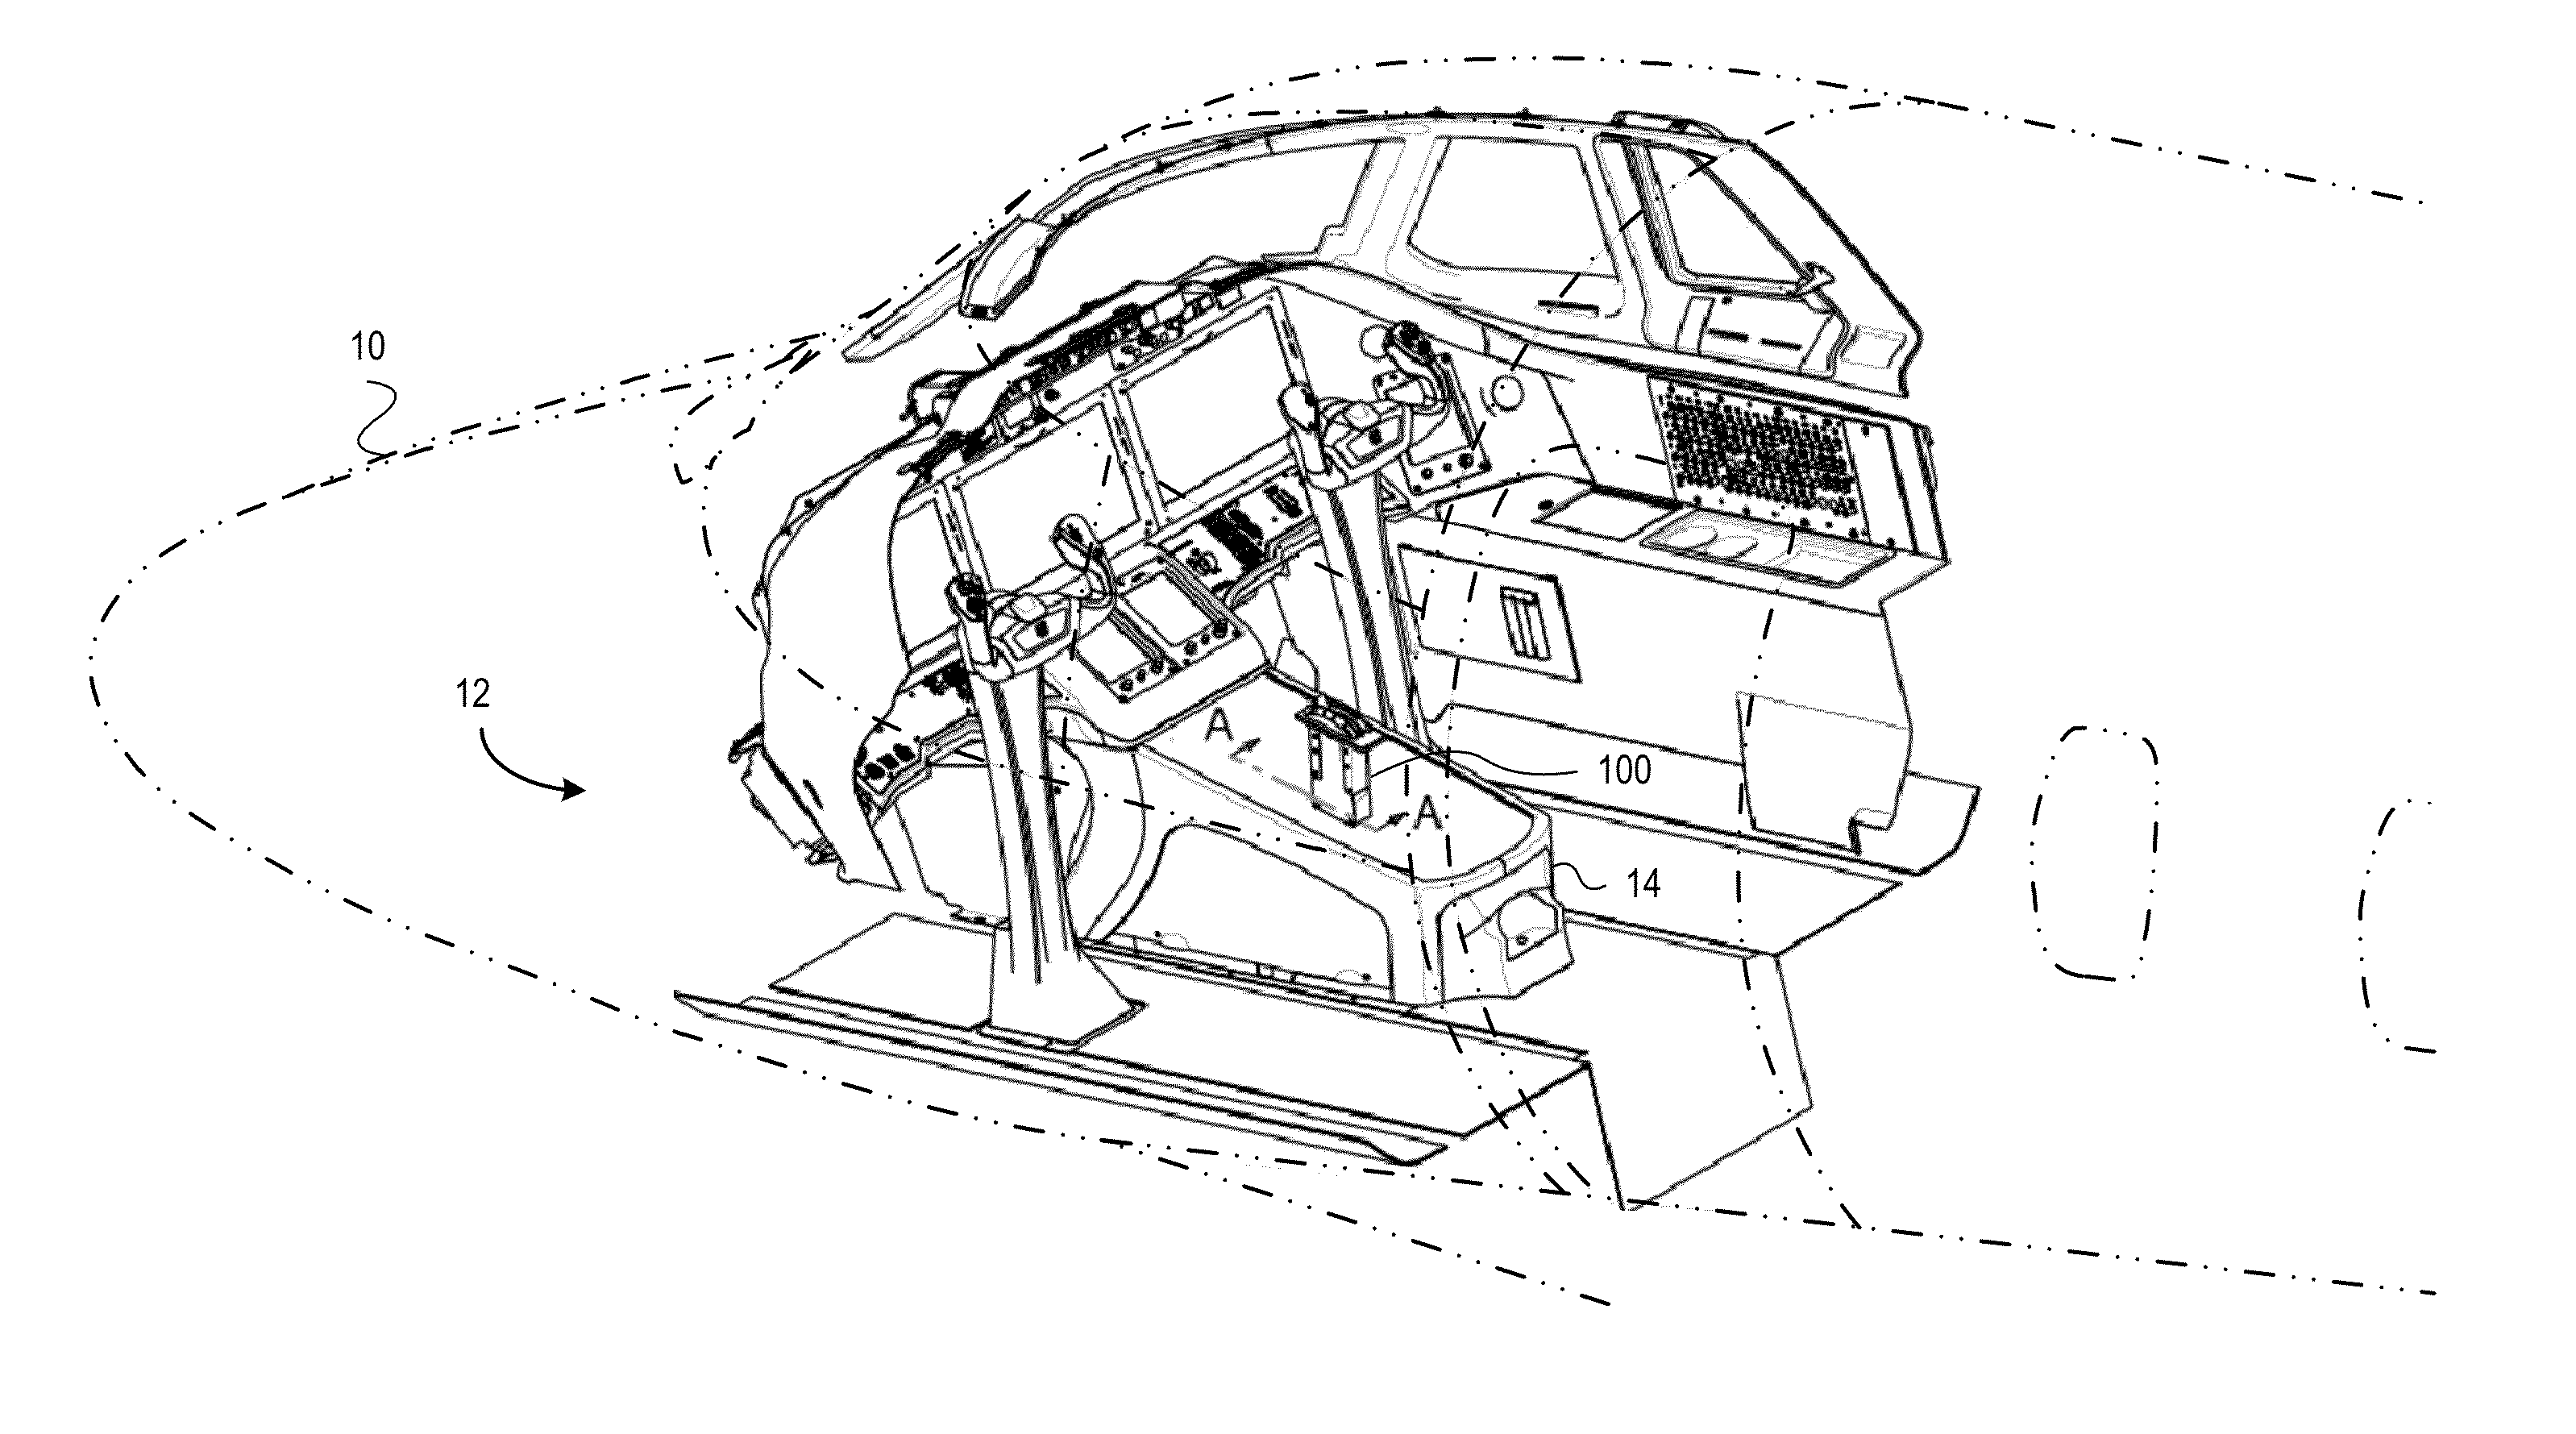 Self-centering aircraft flap position command apparatus